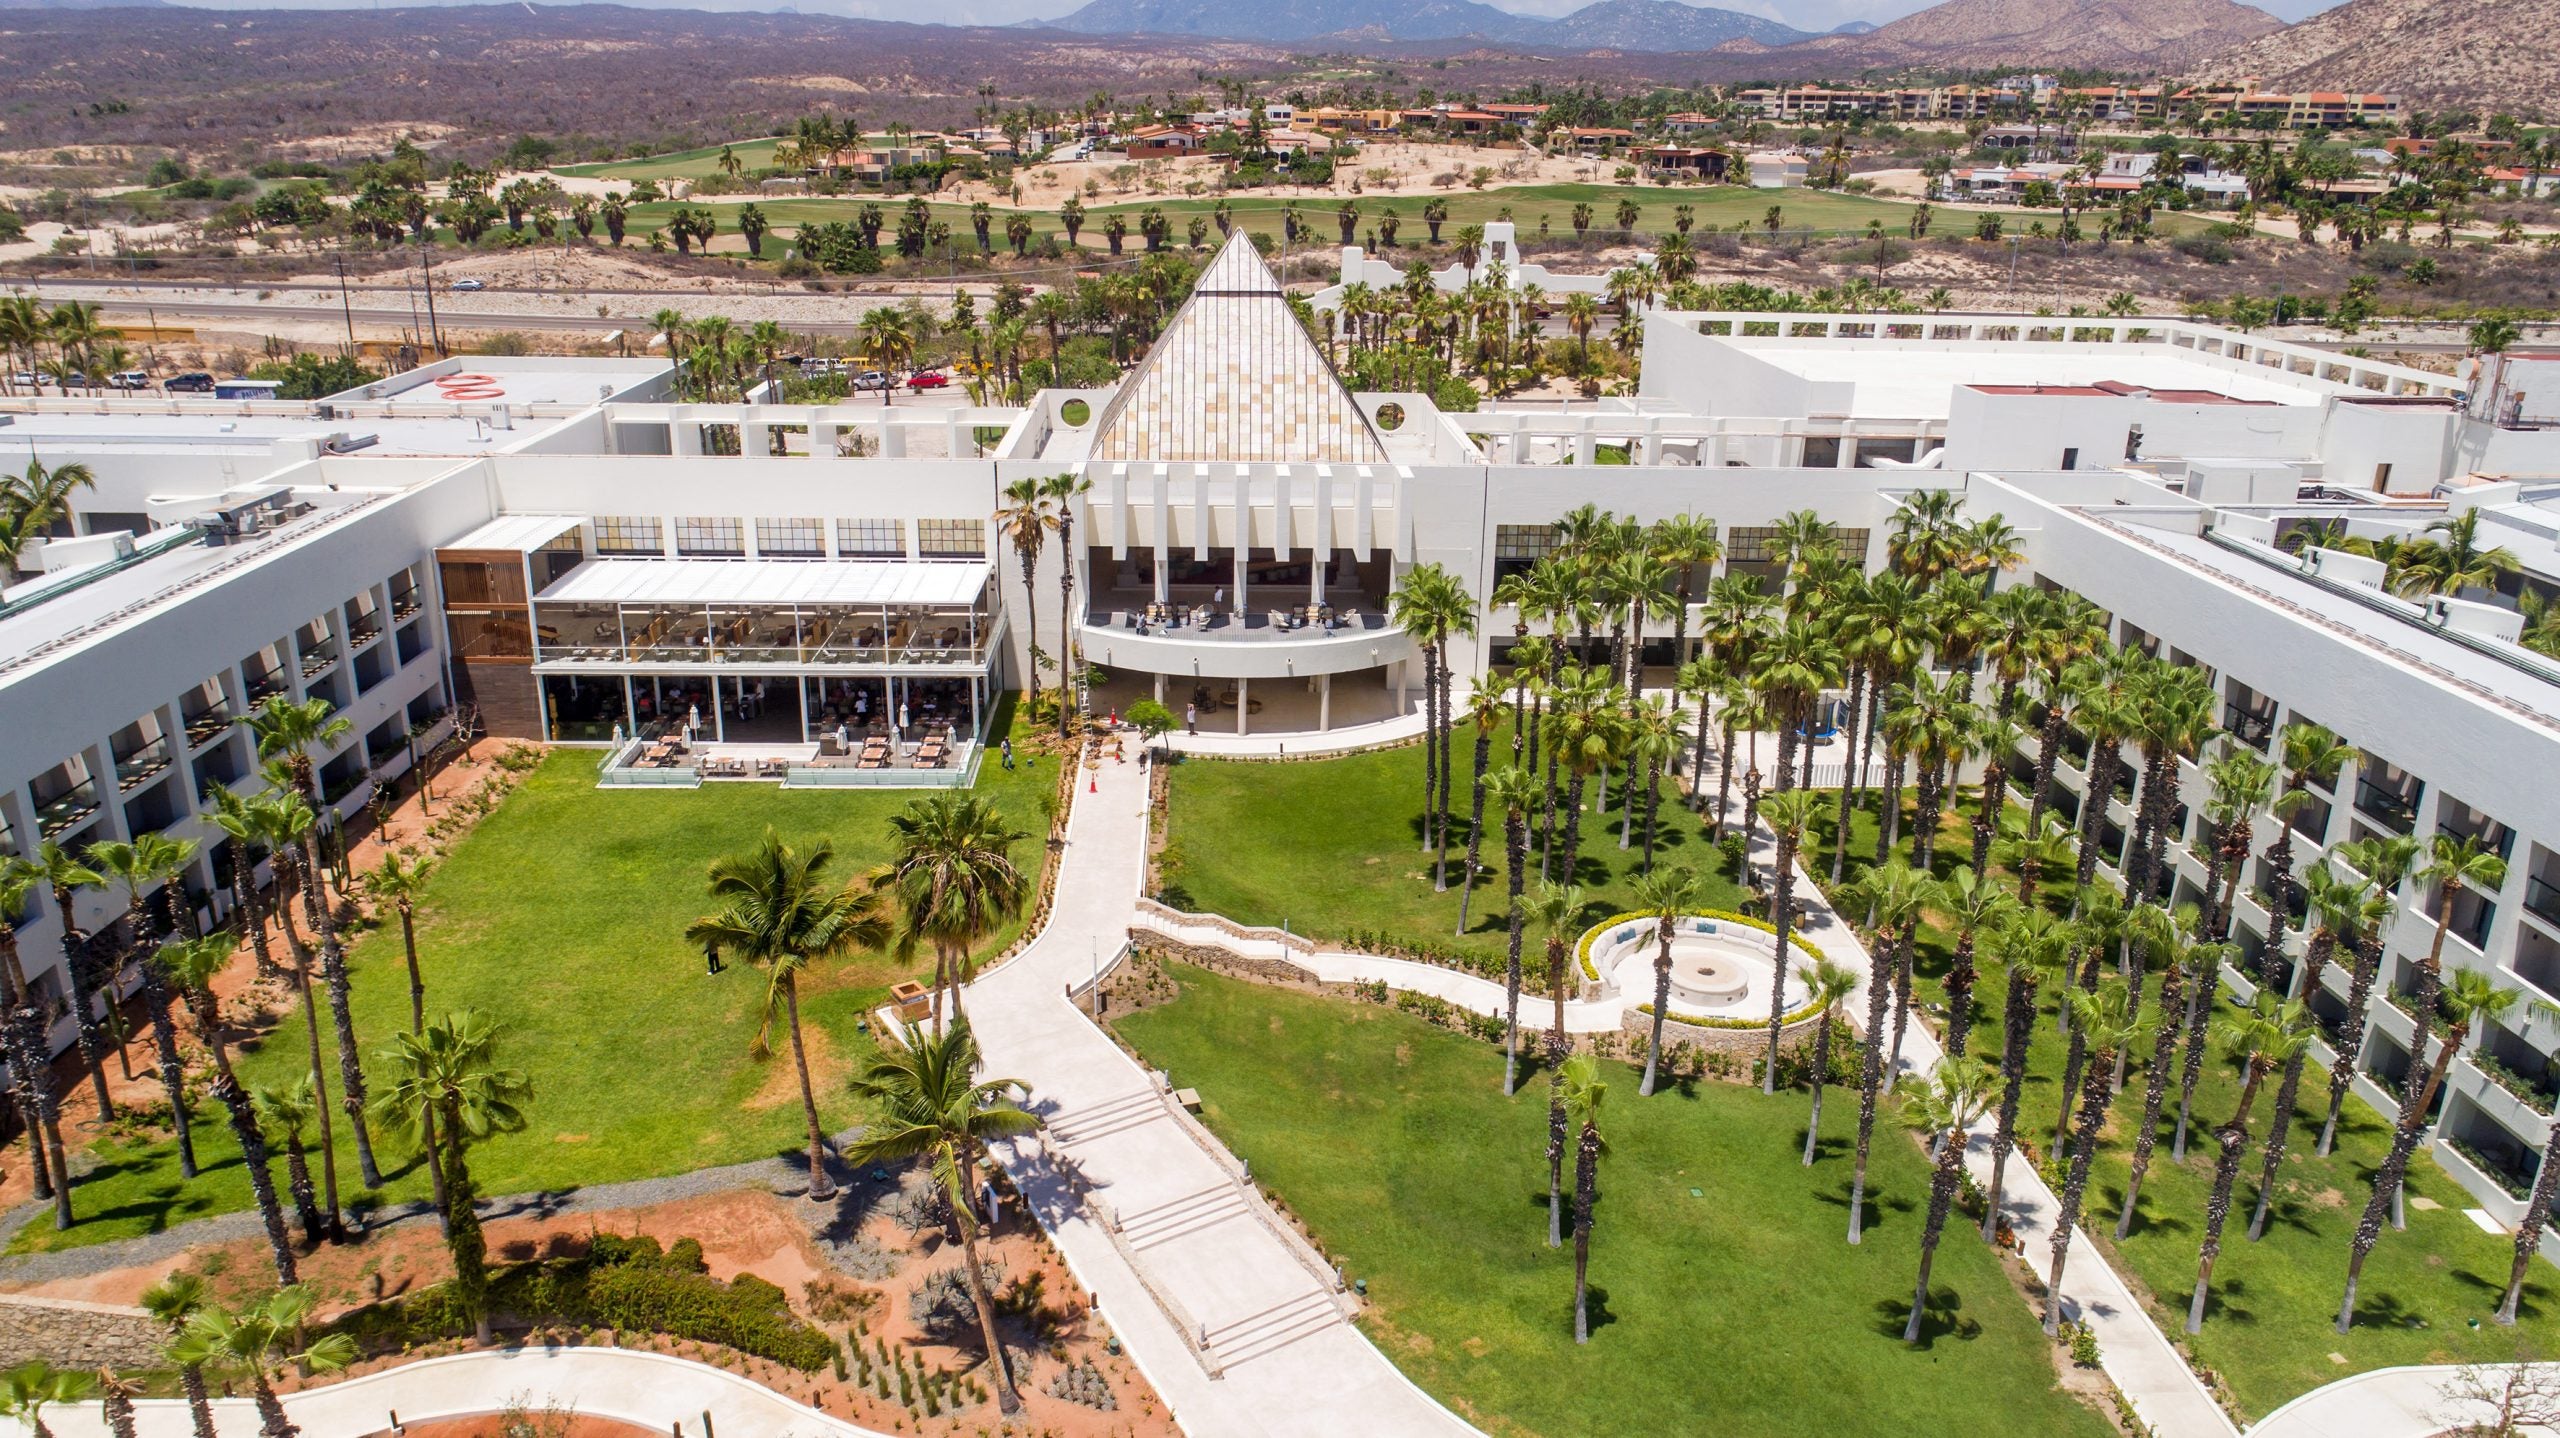 Everything You Can Eat, Explore And Enjoy At Two Of The Hottest Resorts In Los Cabos